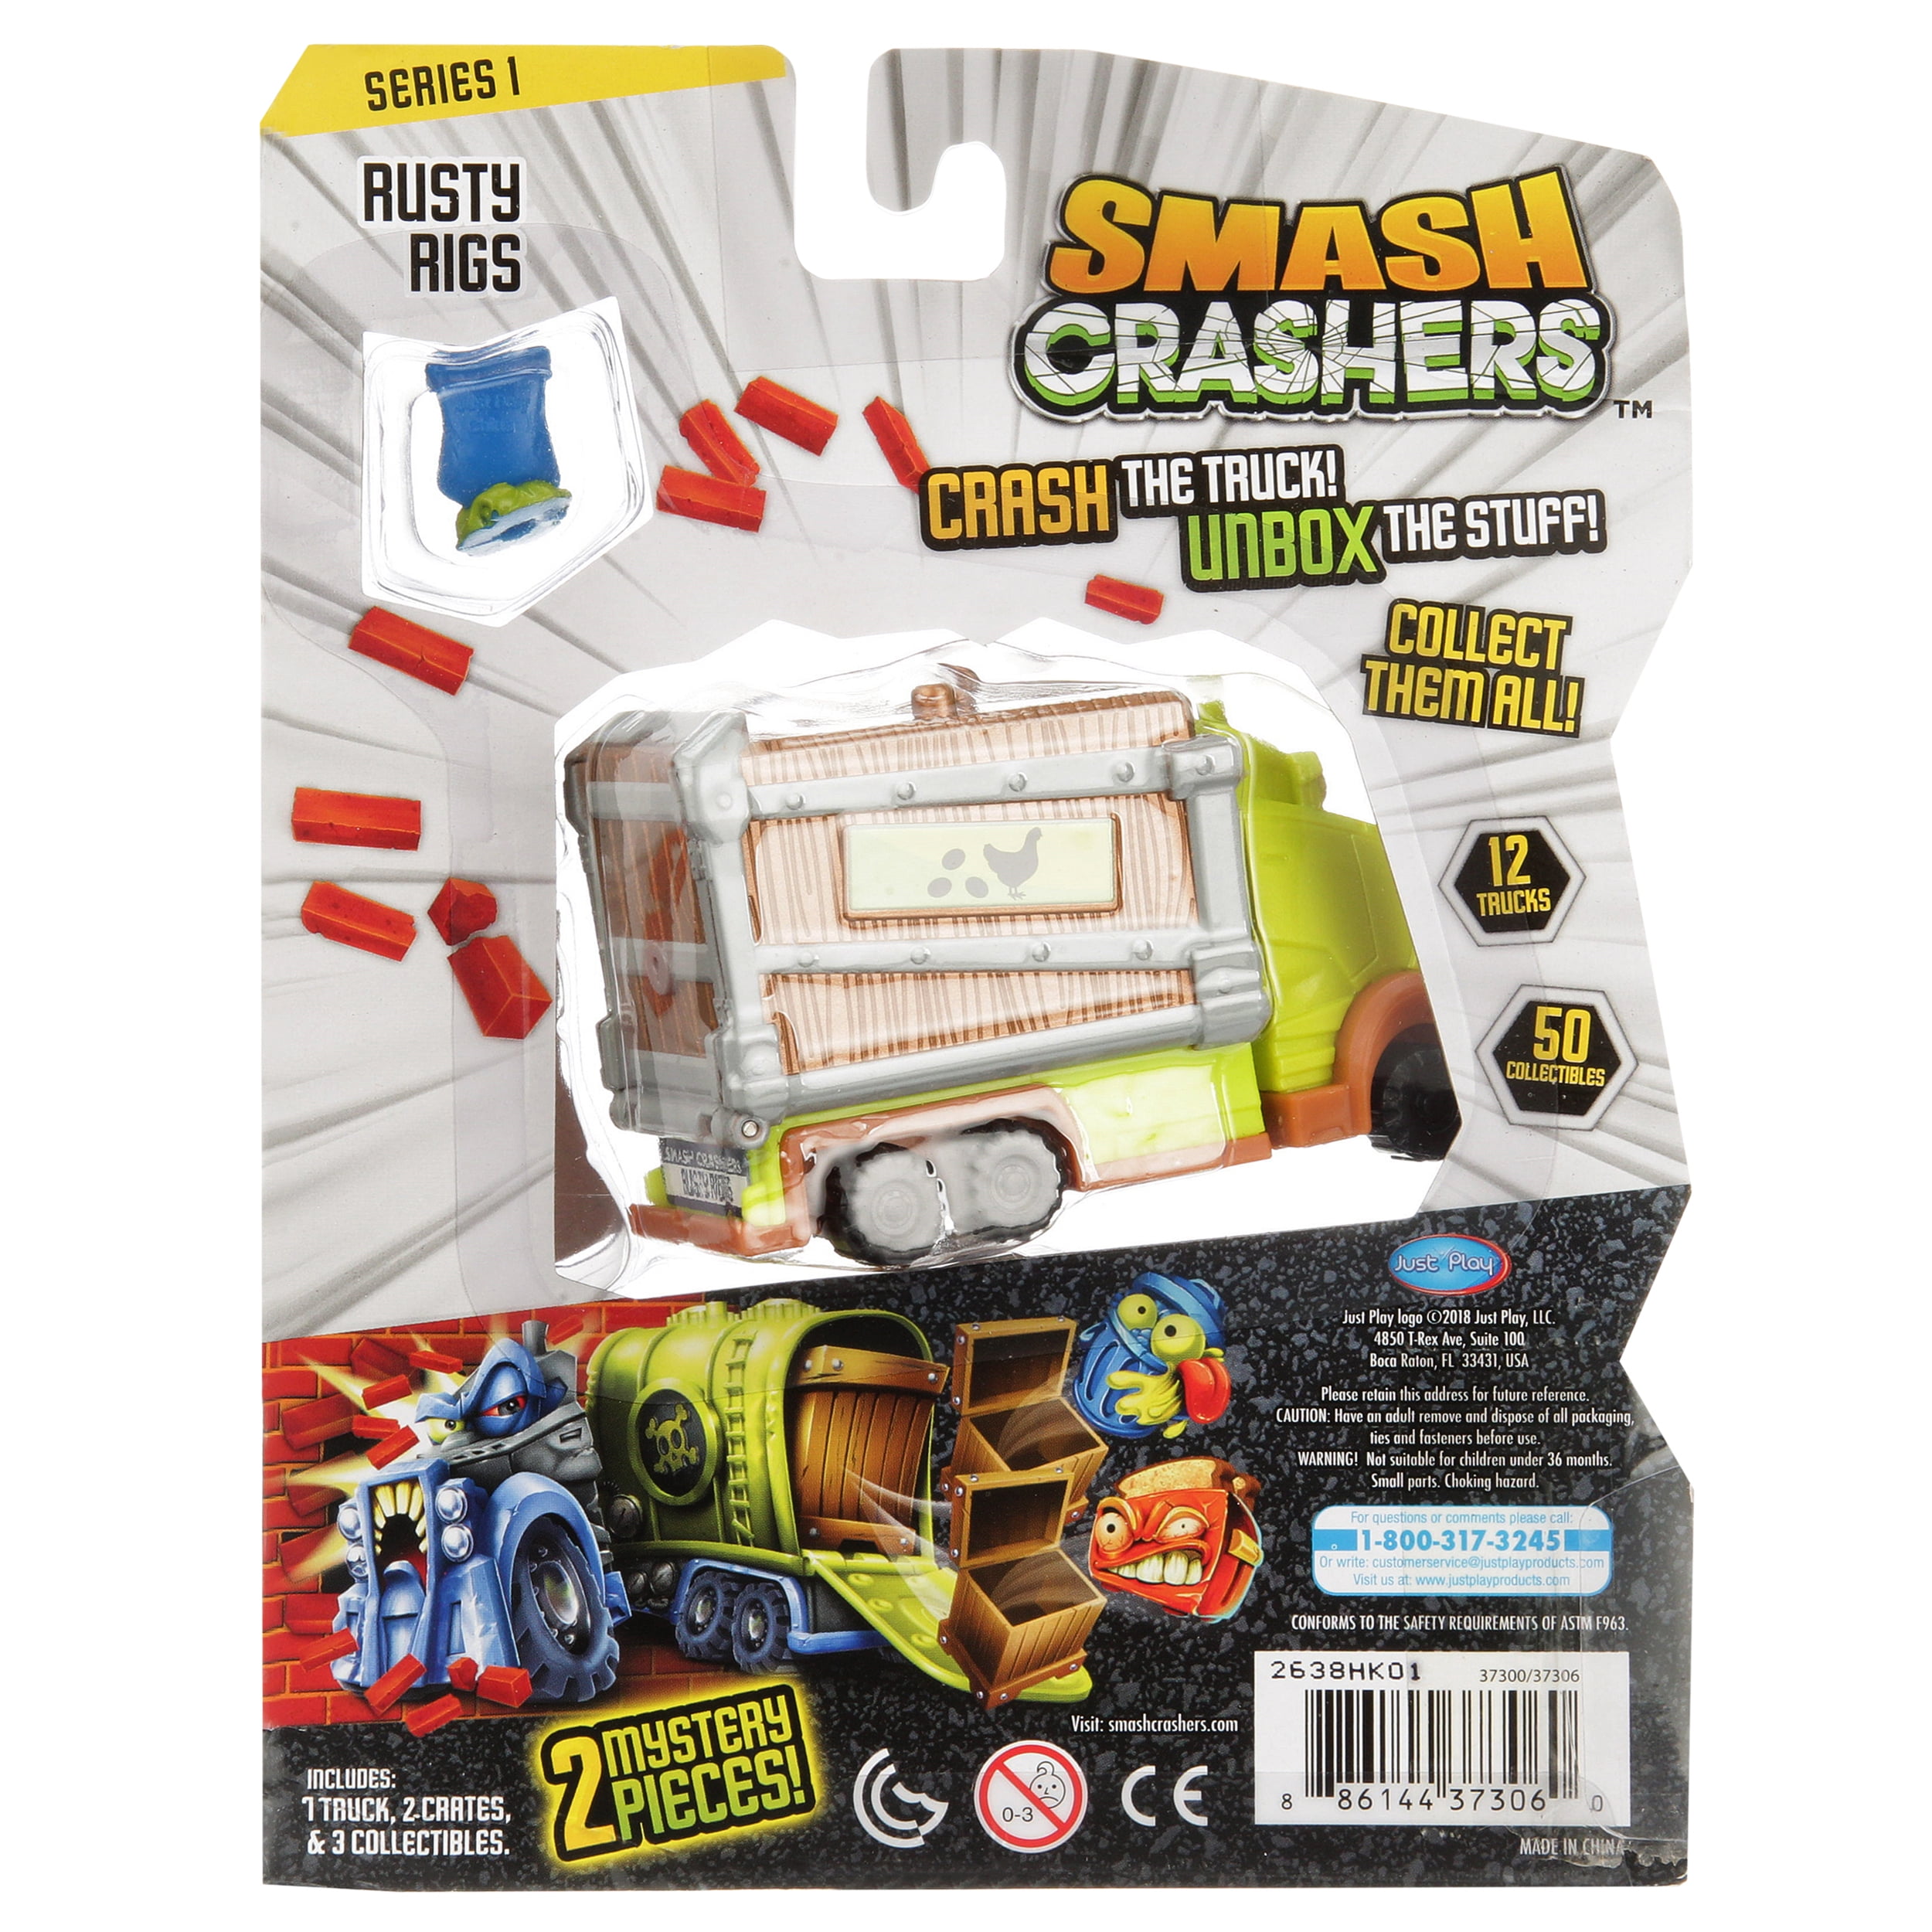 .com: Smash Crashers 3-Pack, Turnpike Ted, Rusty Rigs